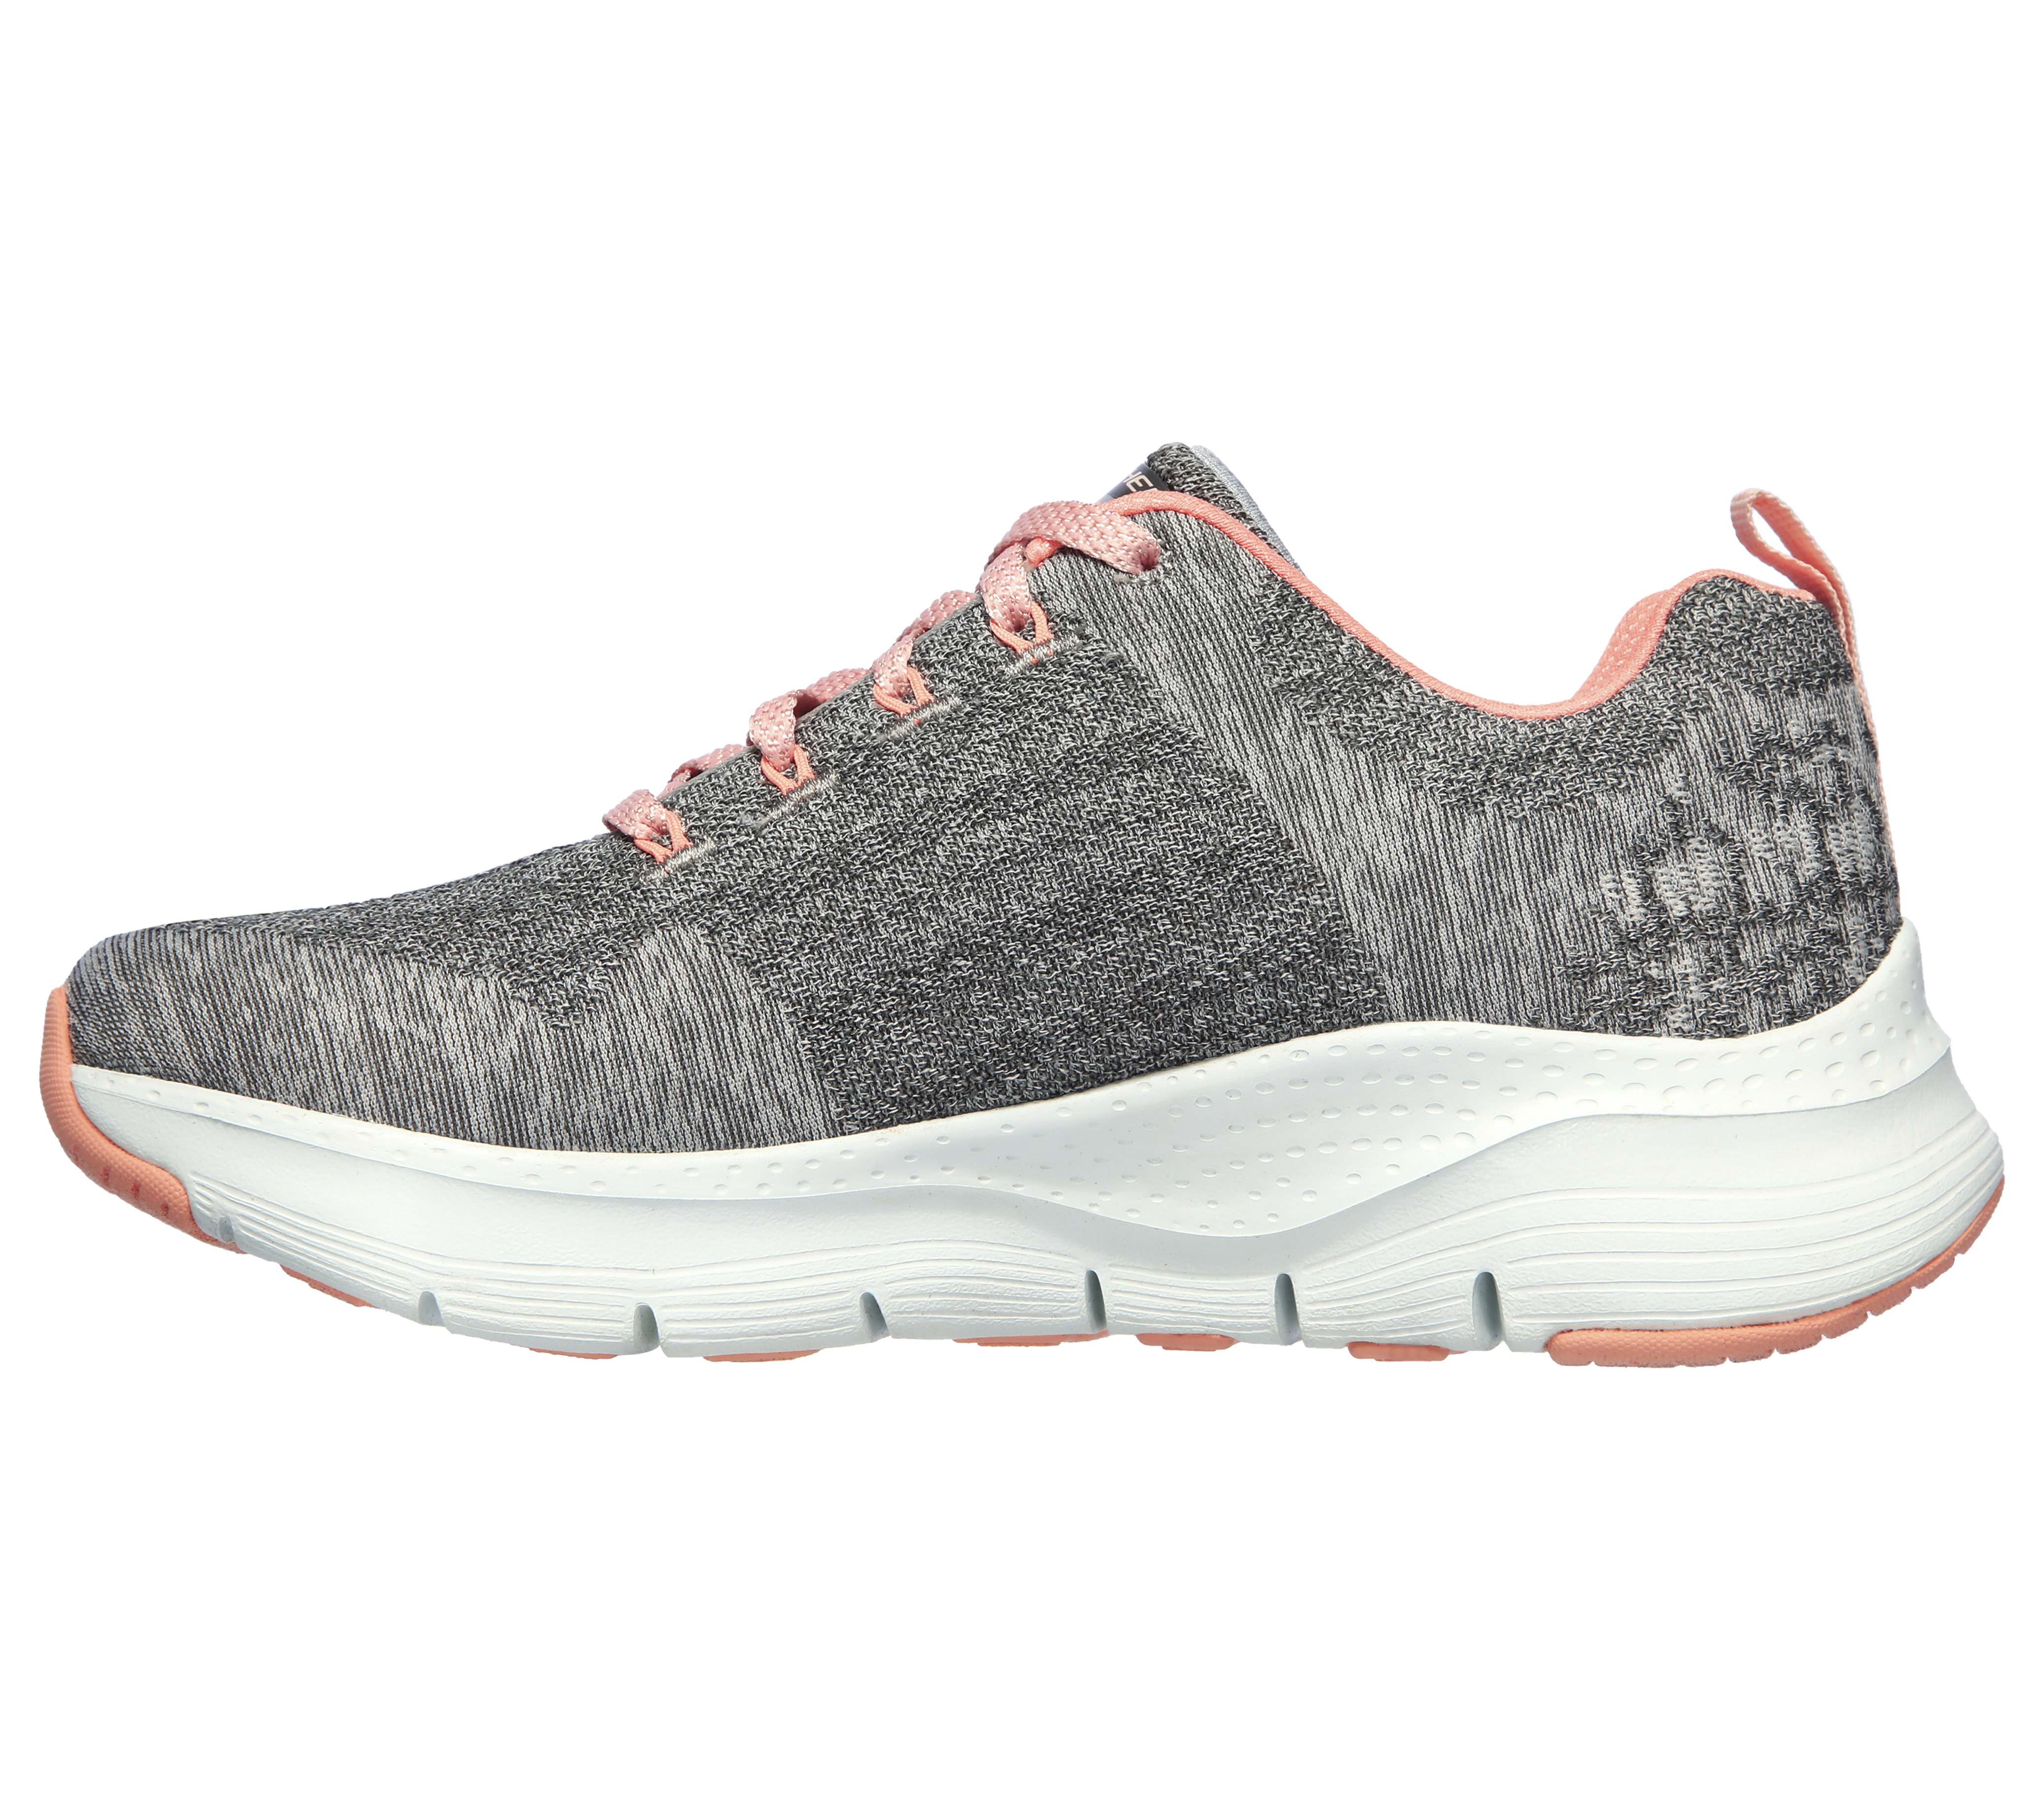 Arch Fit - Comfy | SKECHERS